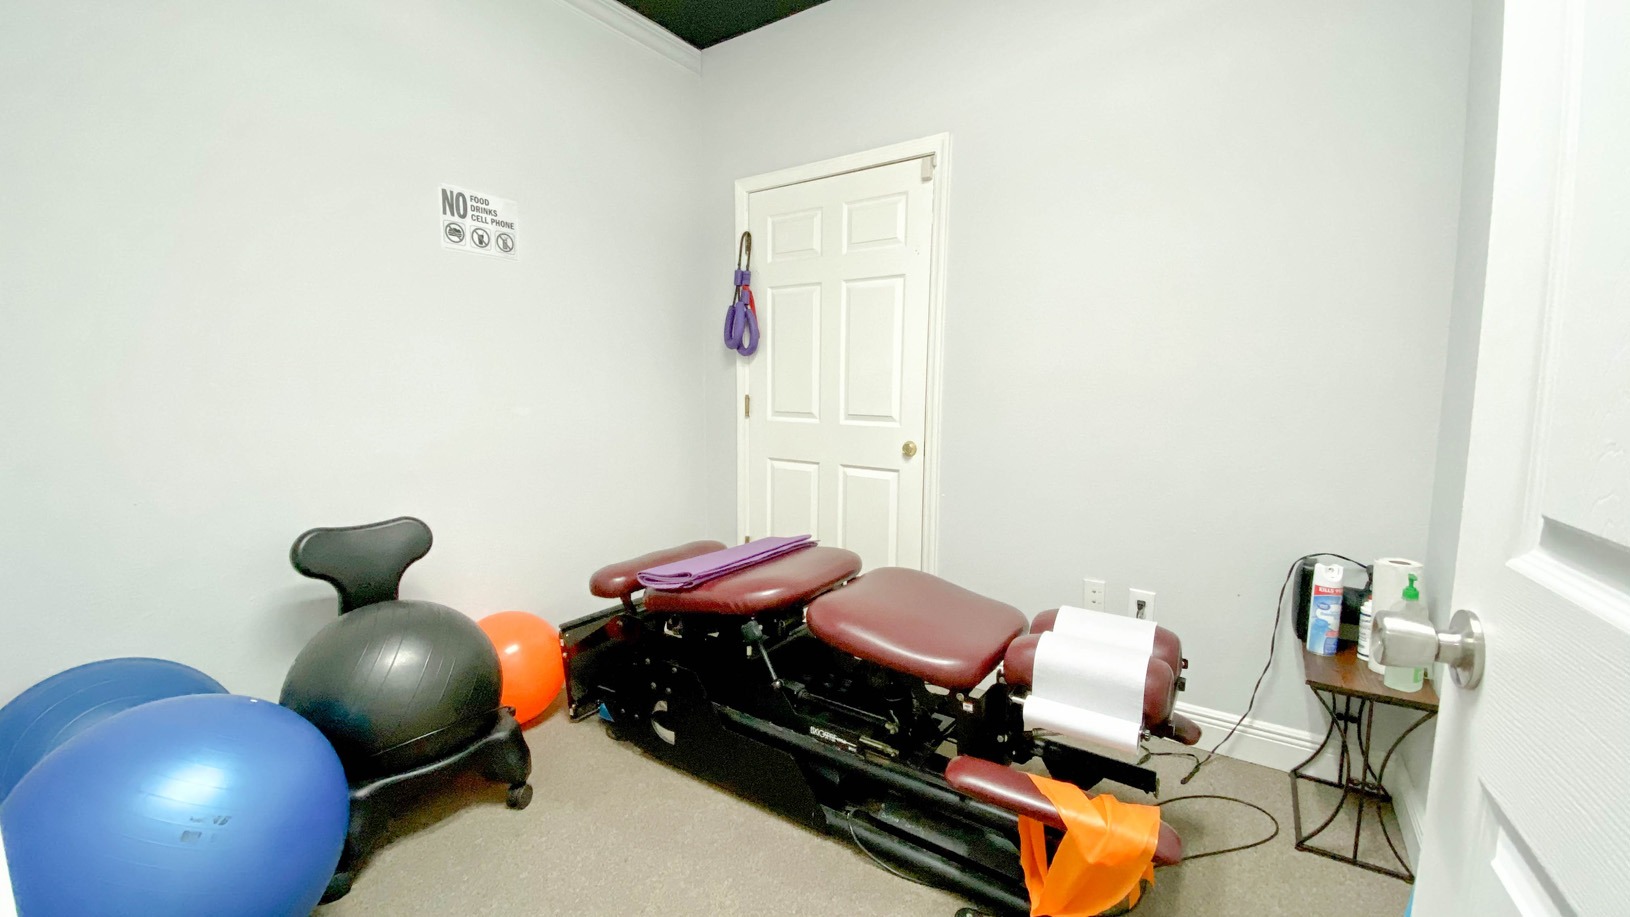 Chiropractor In Kissimmee Florida Top Rated Service Reviews And